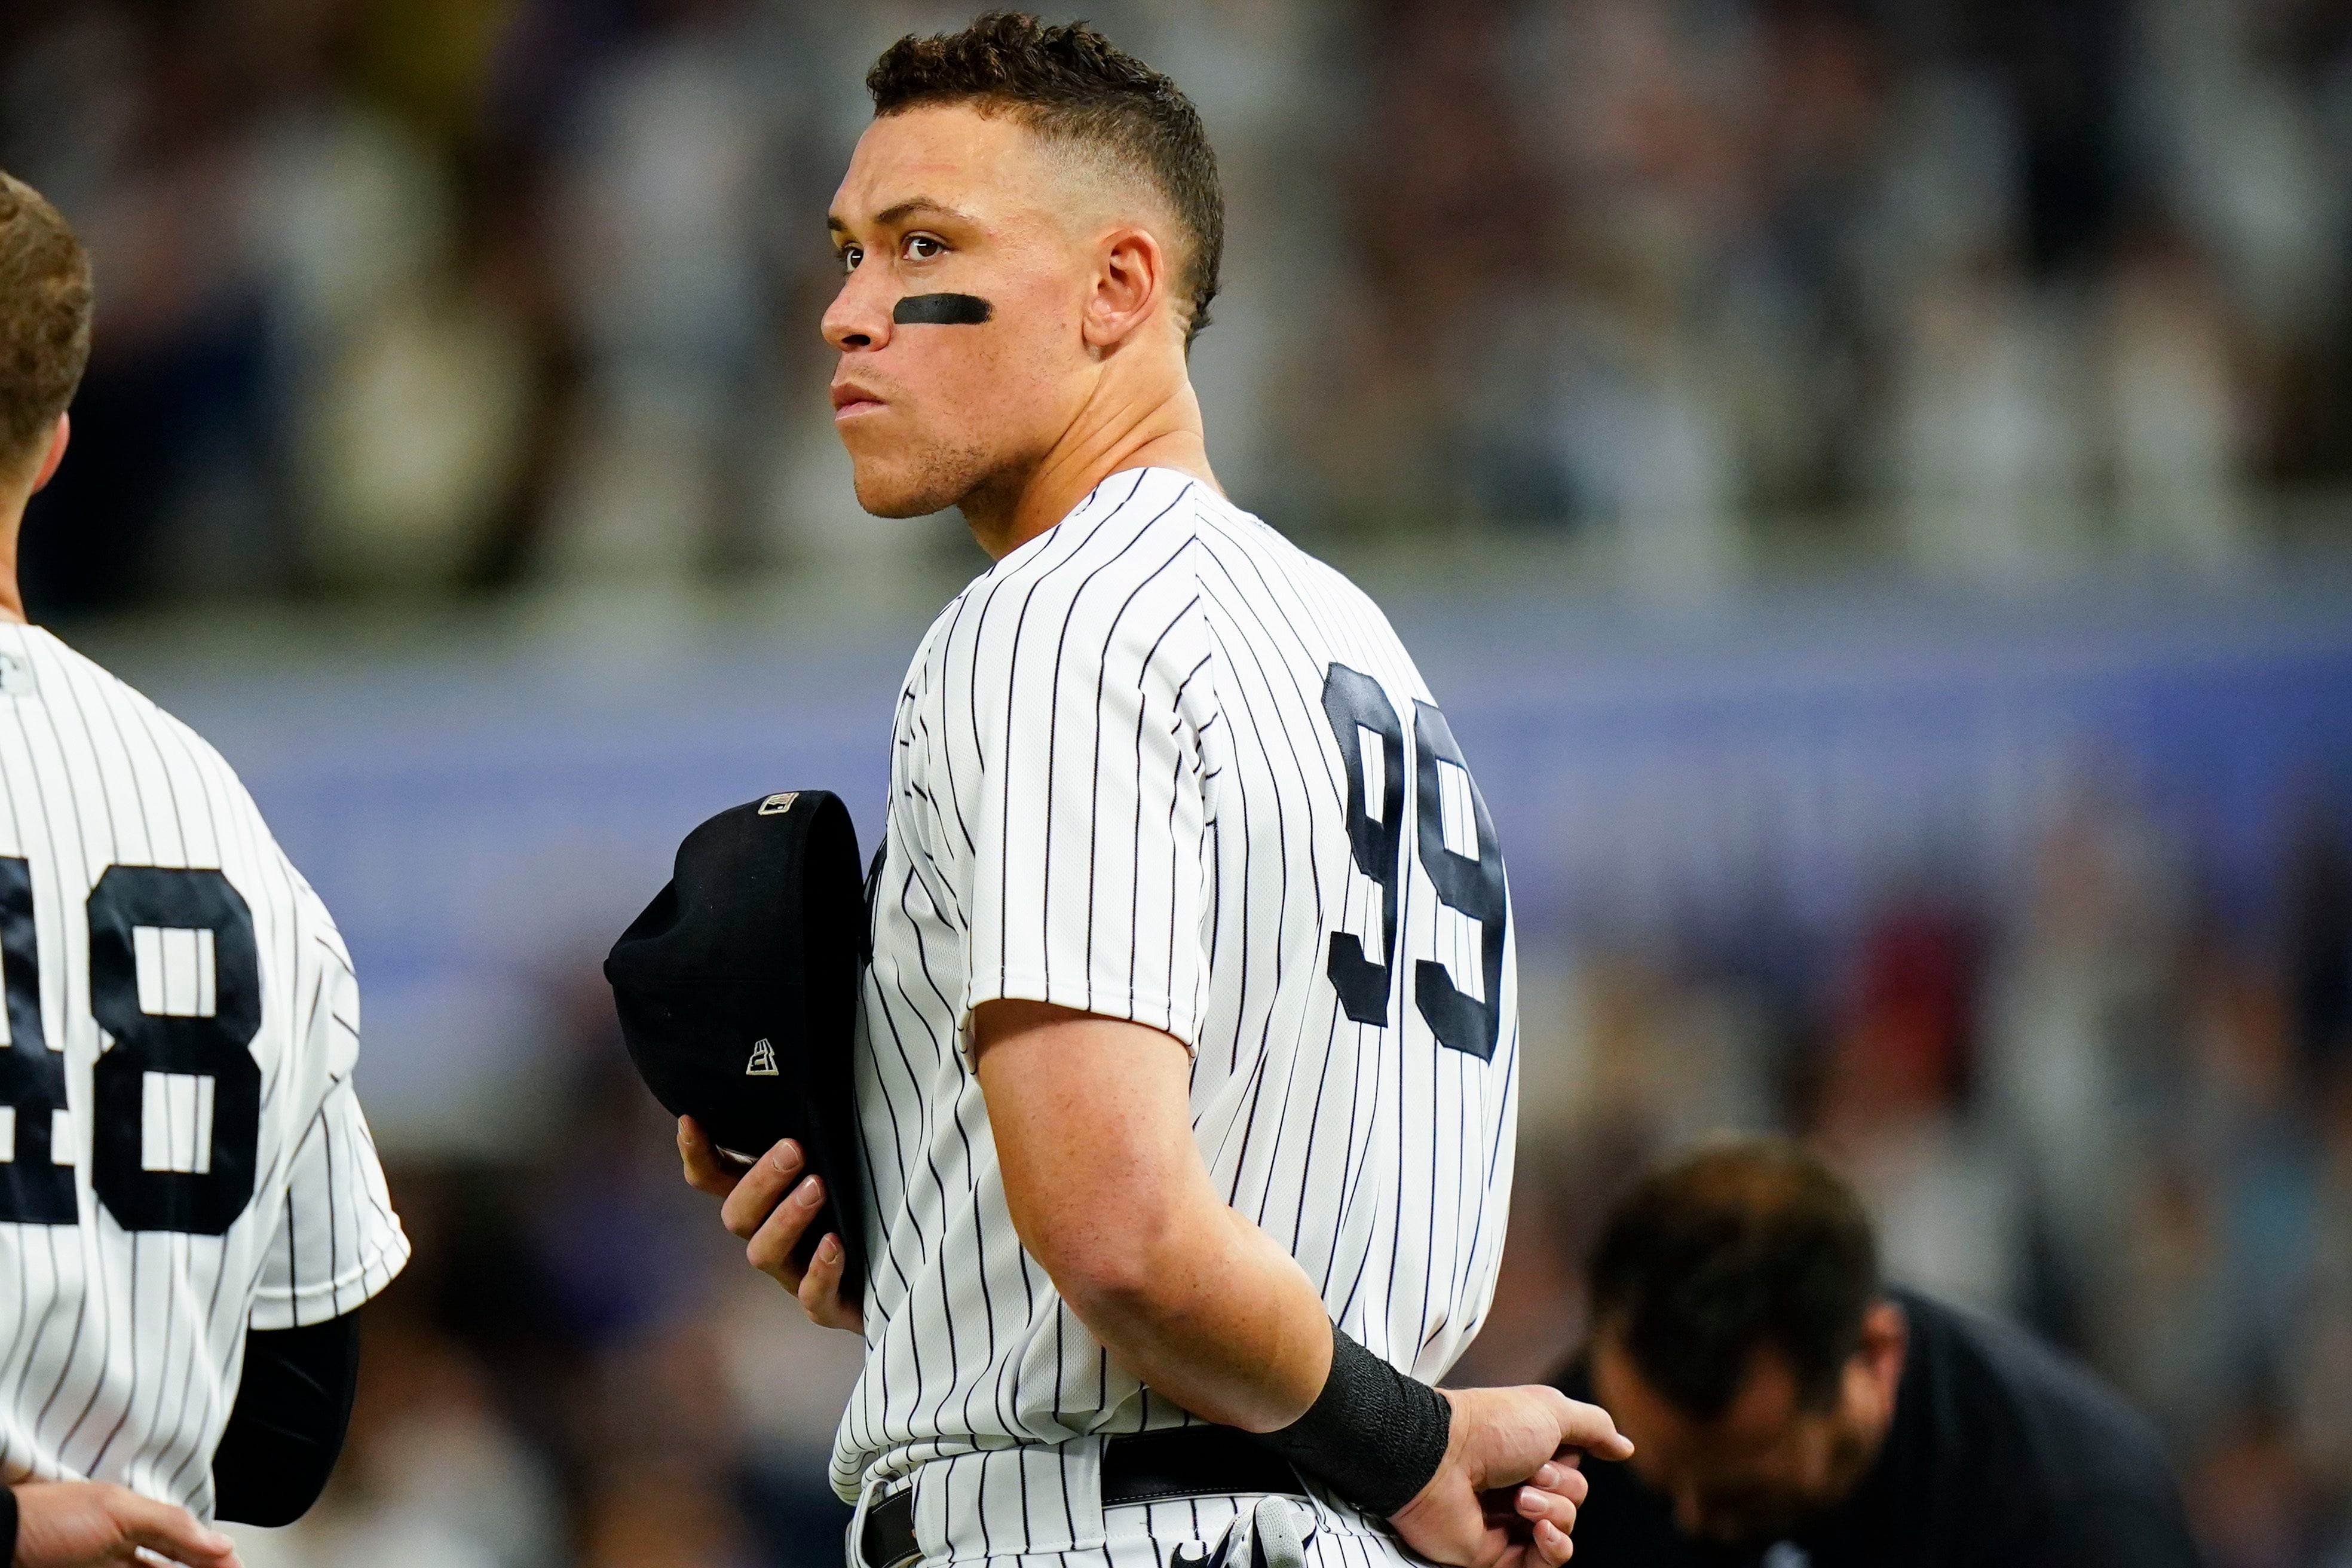 WATCH: Aaron Judge's walk-off clinches Yankees playoff berth